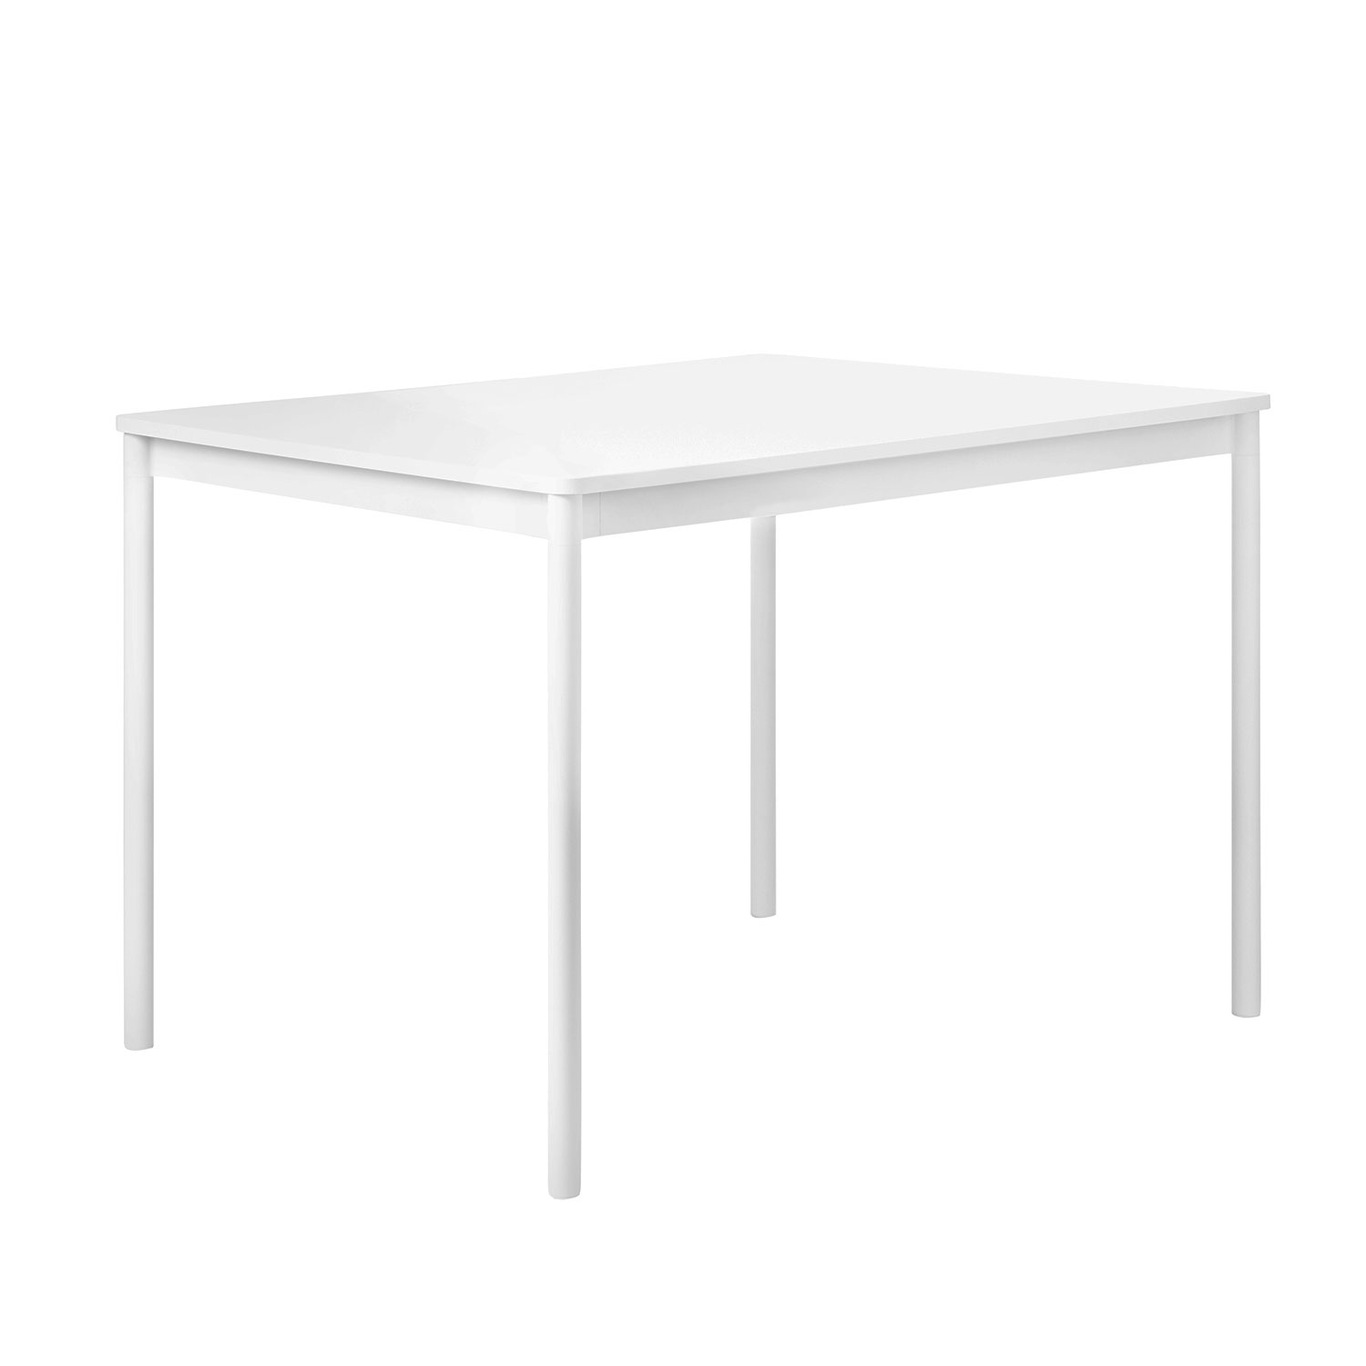 Base dining table 140X80, white